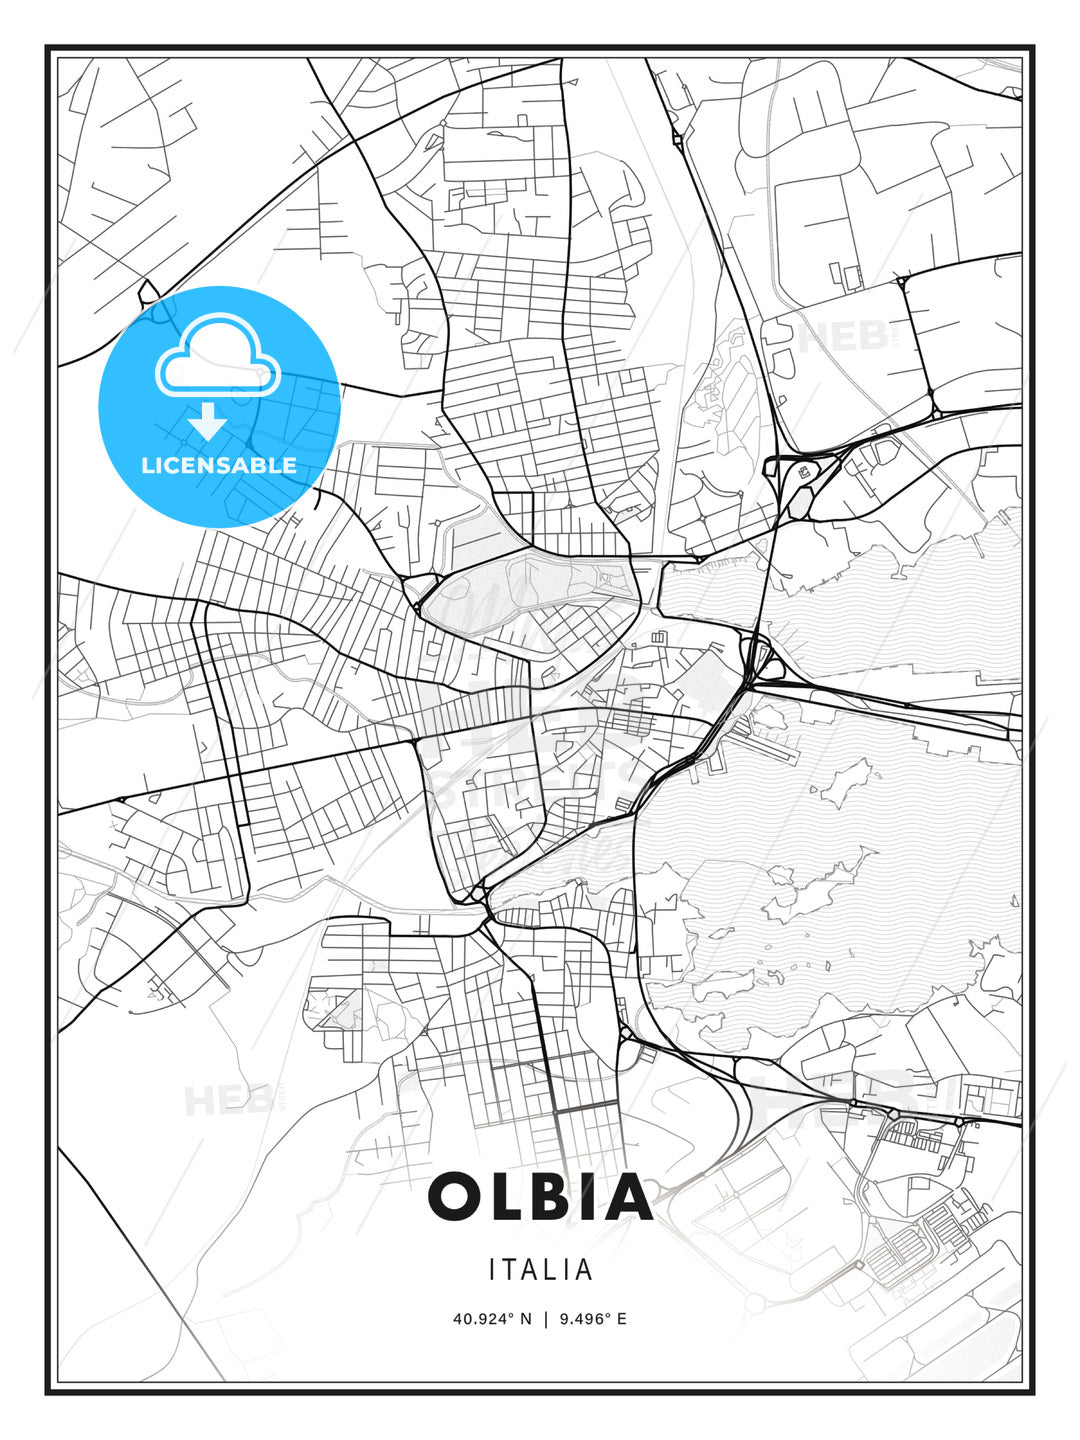 Olbia, Italy, Modern Print Template in Various Formats - HEBSTREITS Sketches